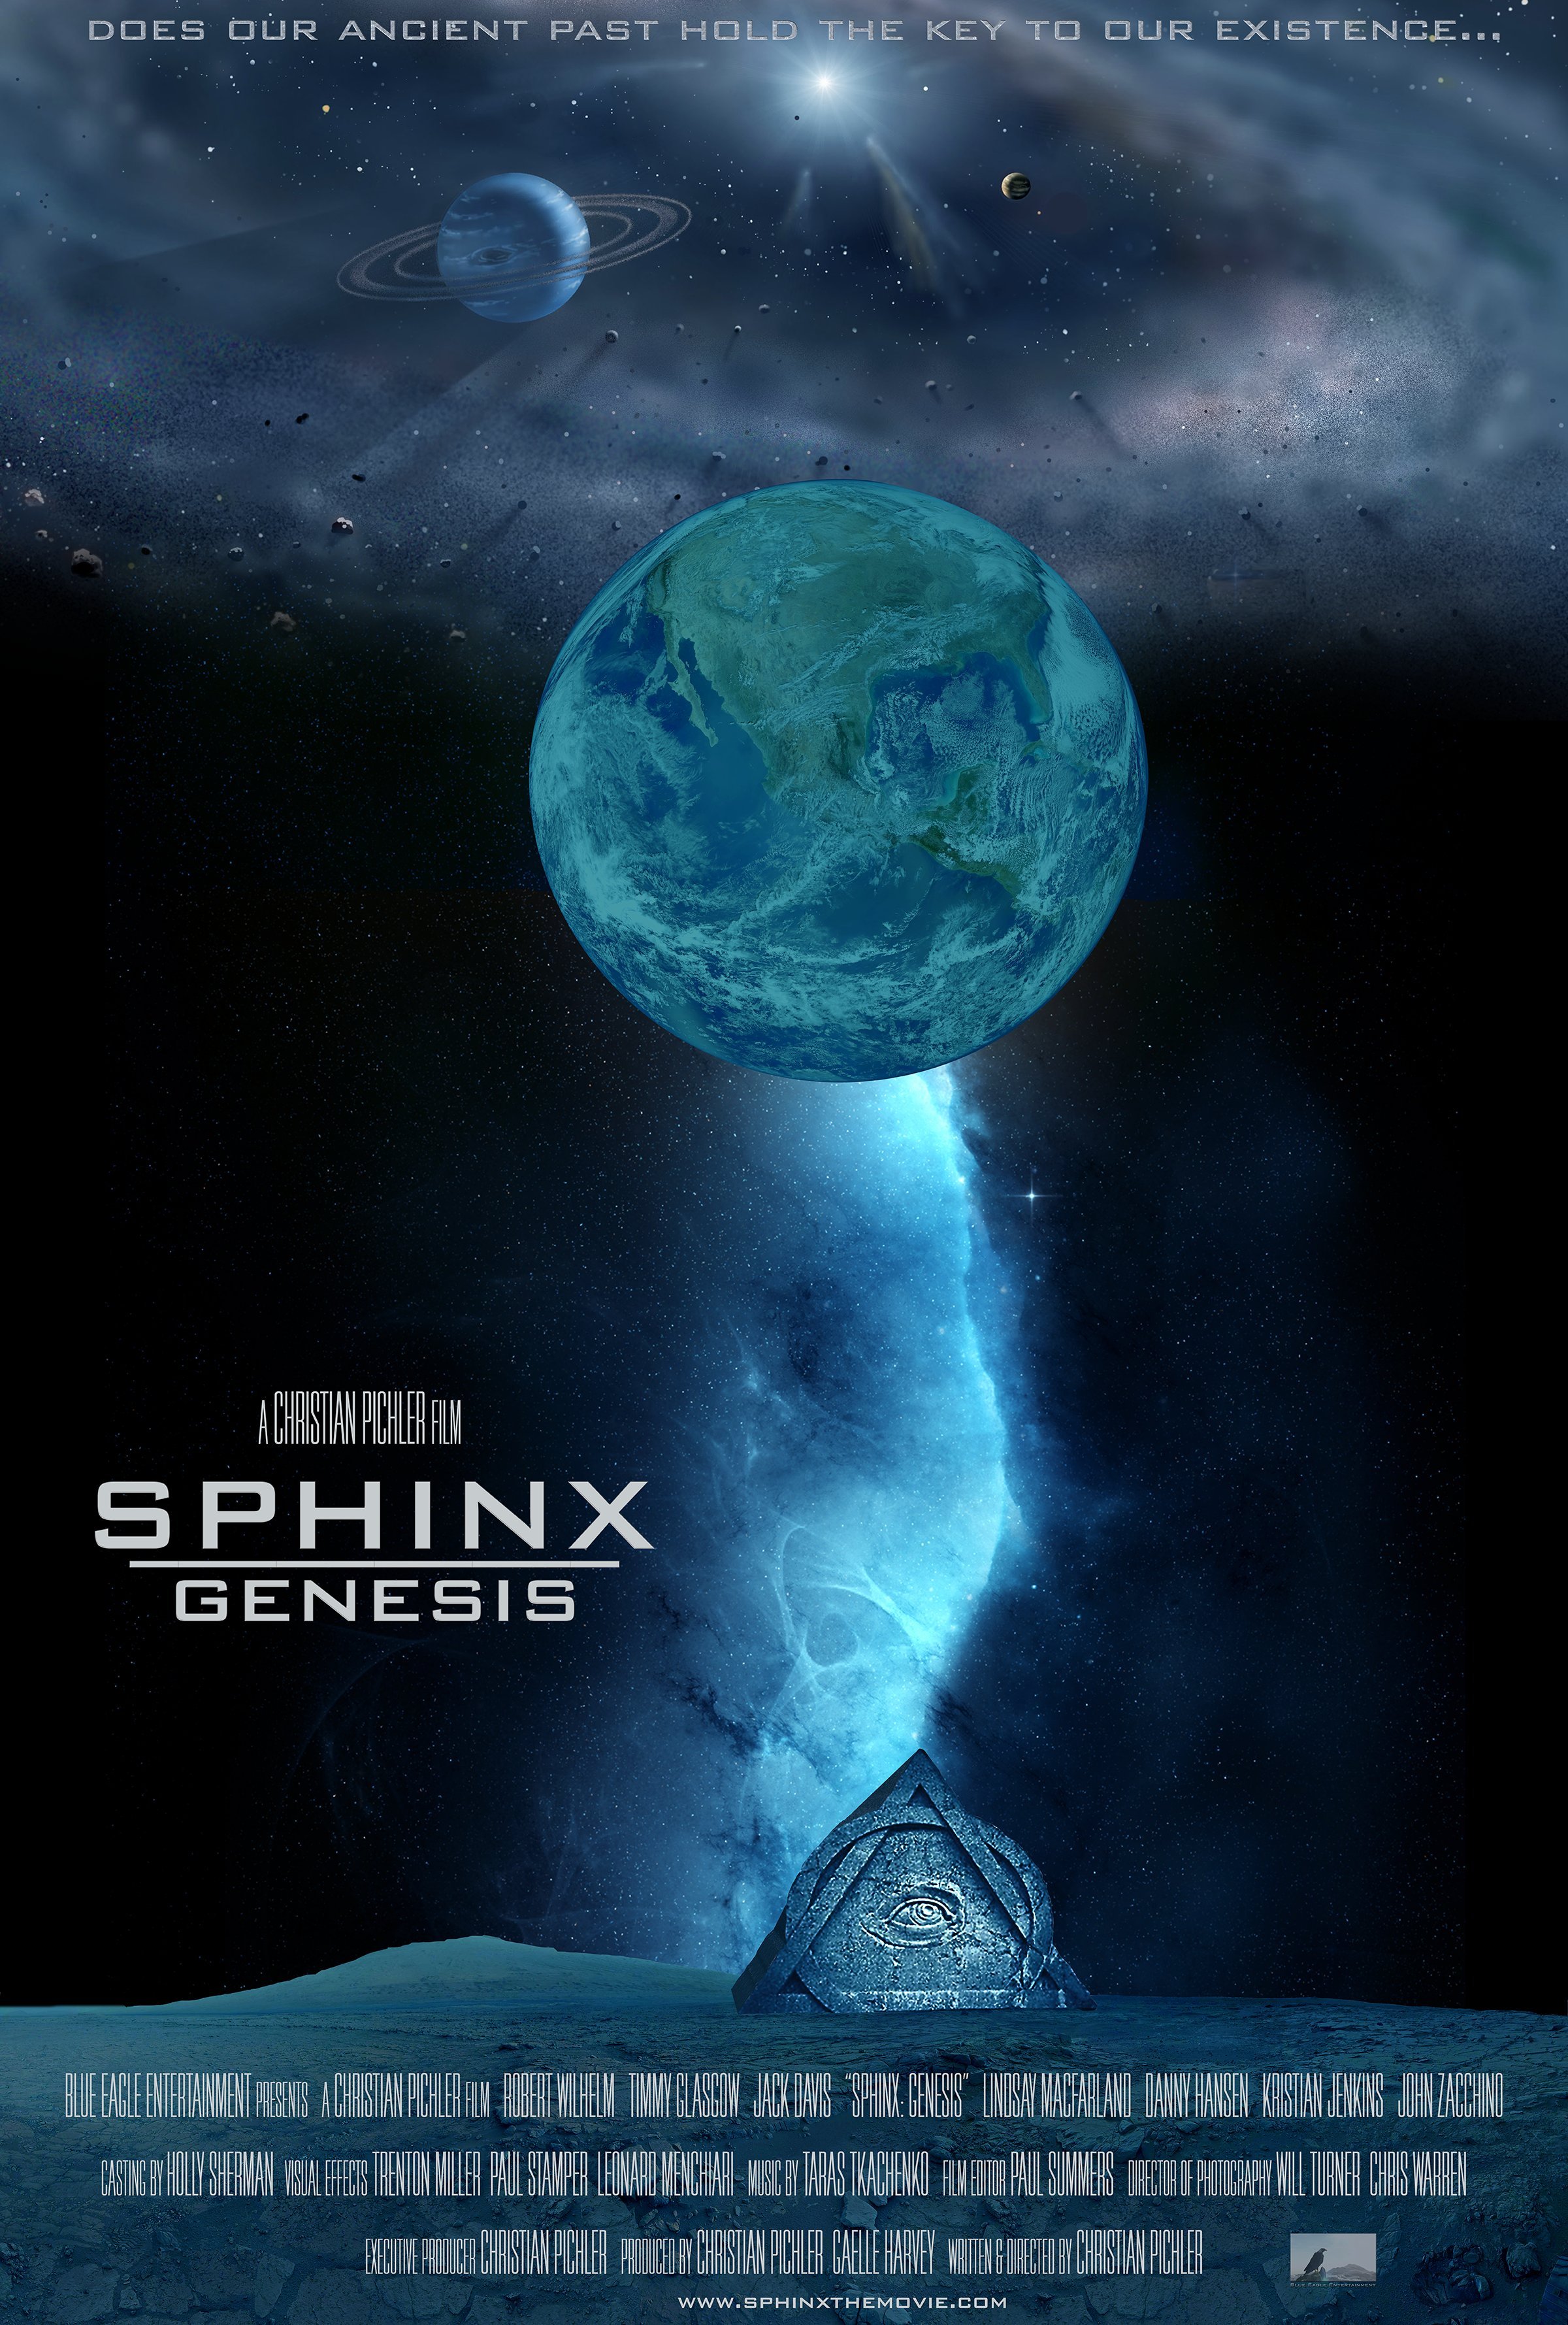 SPHINX: Genesis (2015), directed by Christian Pichler